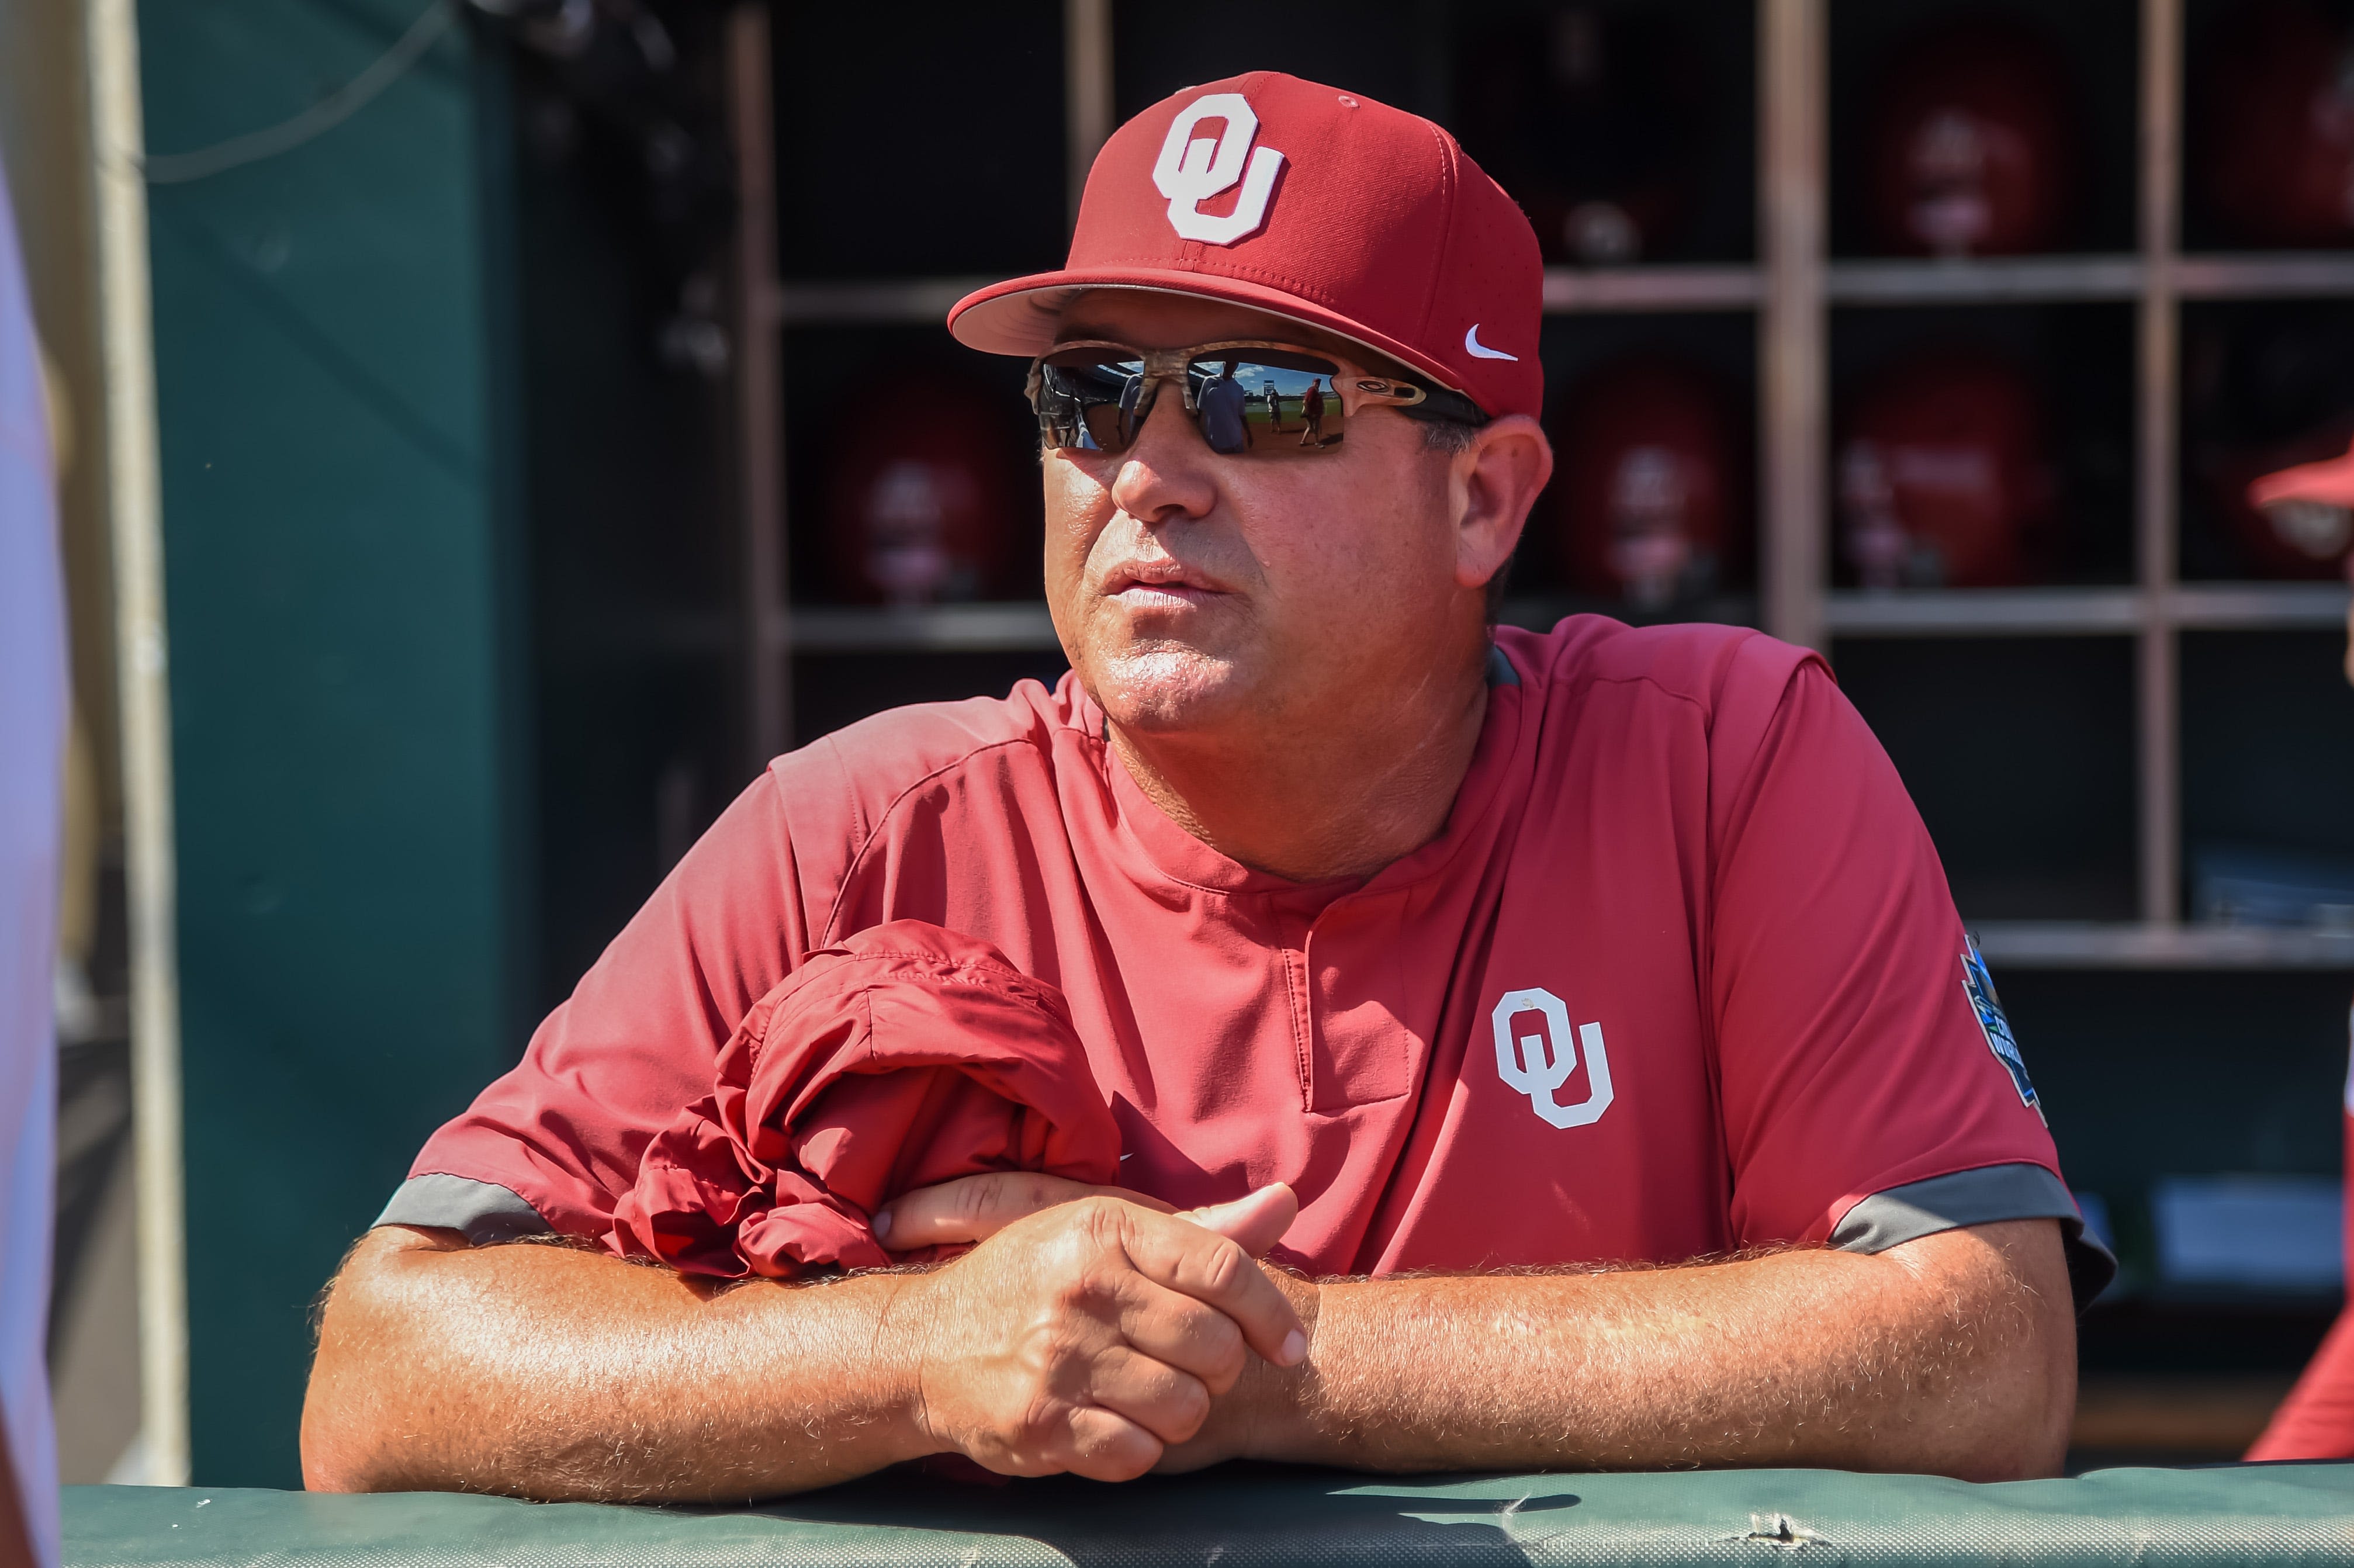 OU baseball earns No. 9 overall seed, hosting Norman Regional for NCAA Tournament